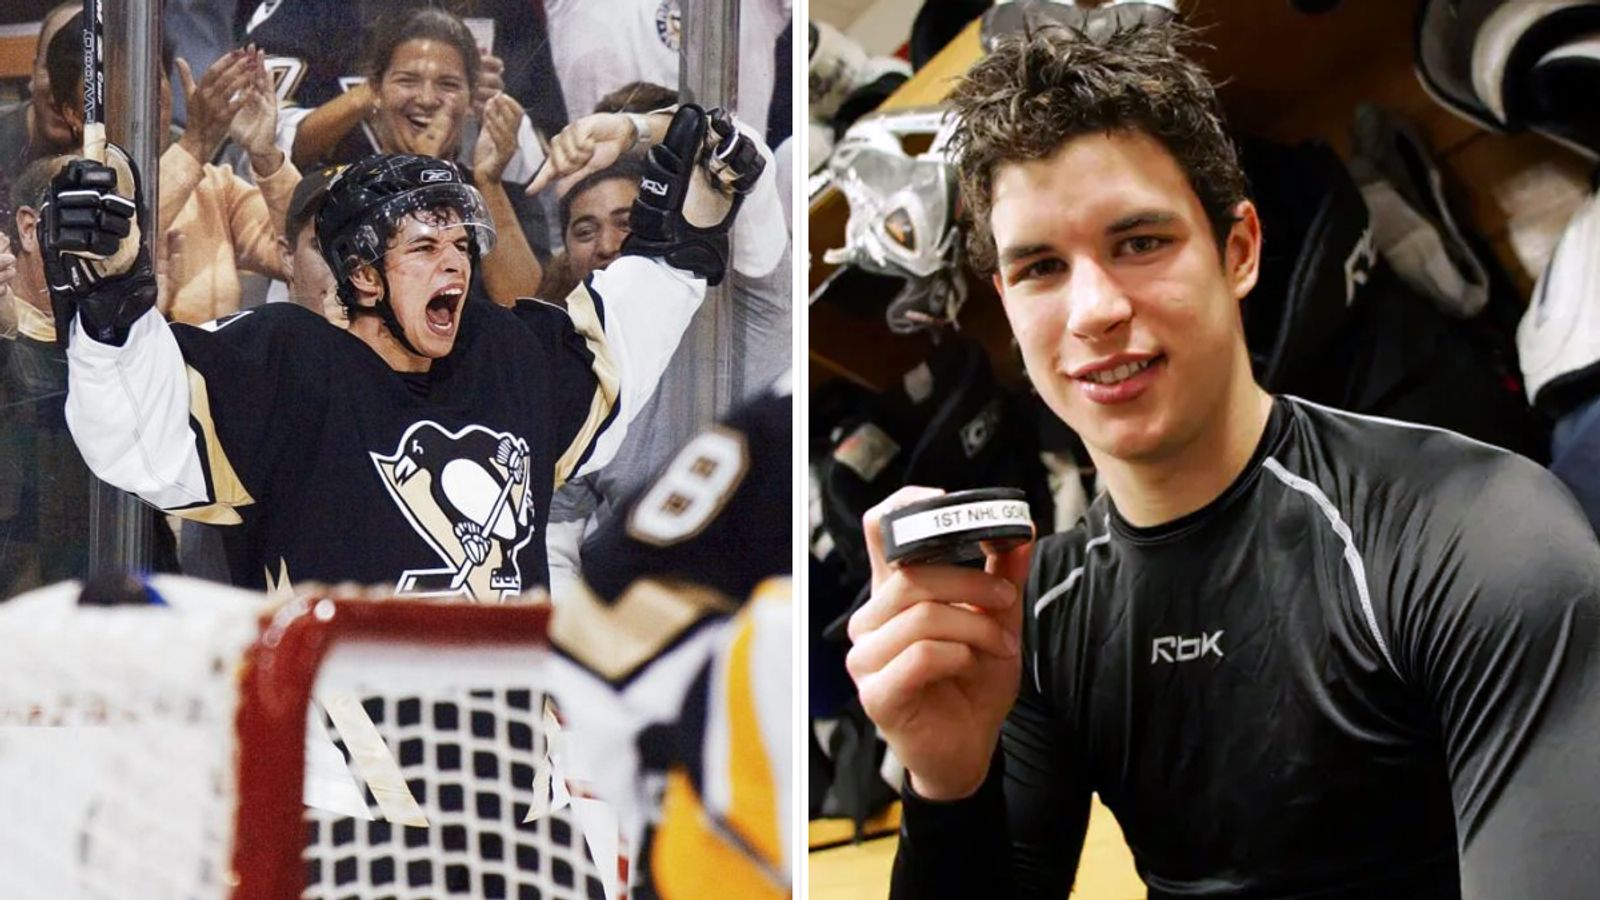 Sidney Crosby's Pittsburgh Penguins Jersey from the 2008 W…